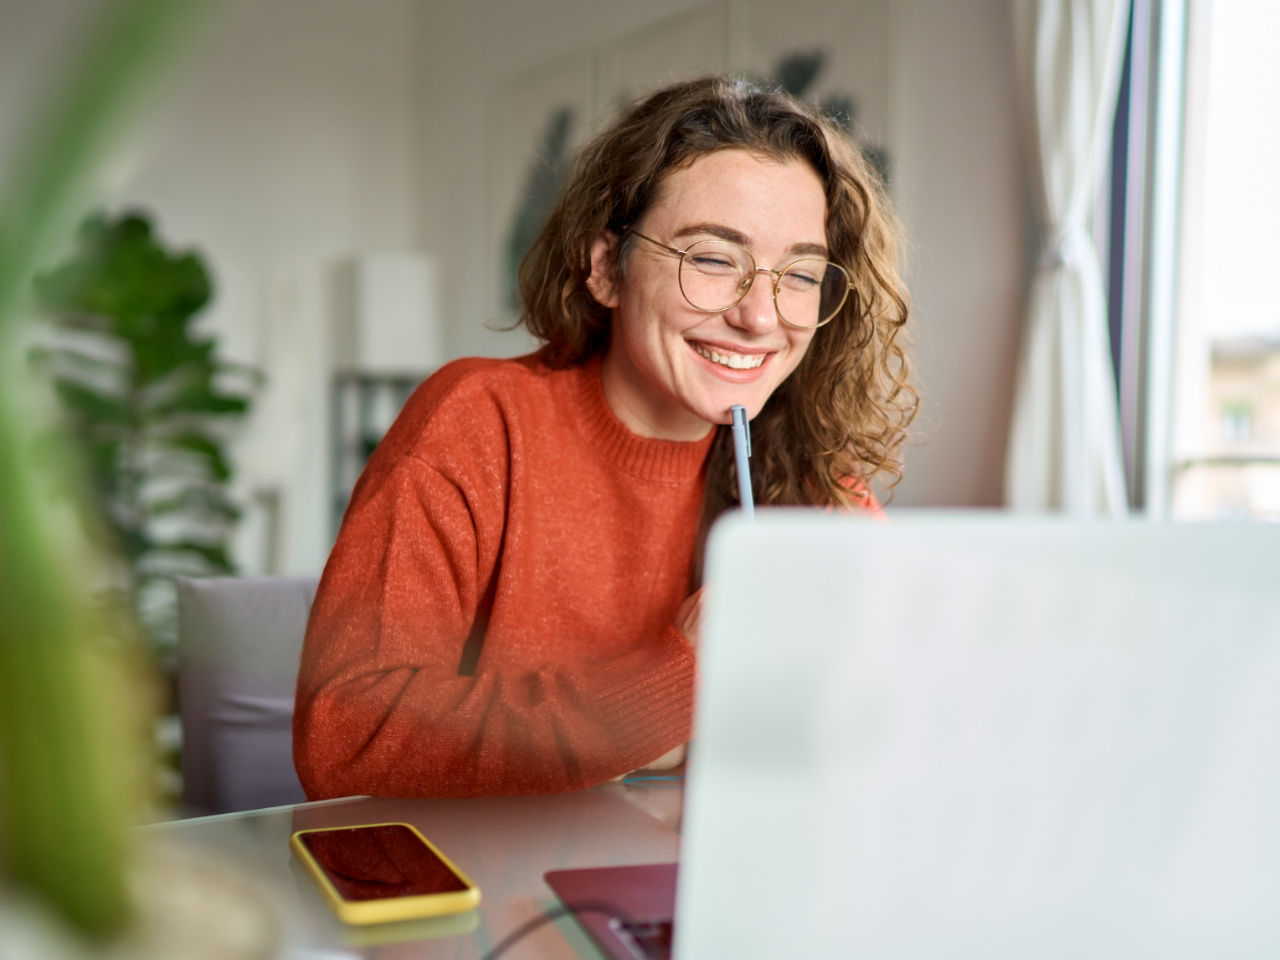 Woman working from home remotely connecting via TeamViewer